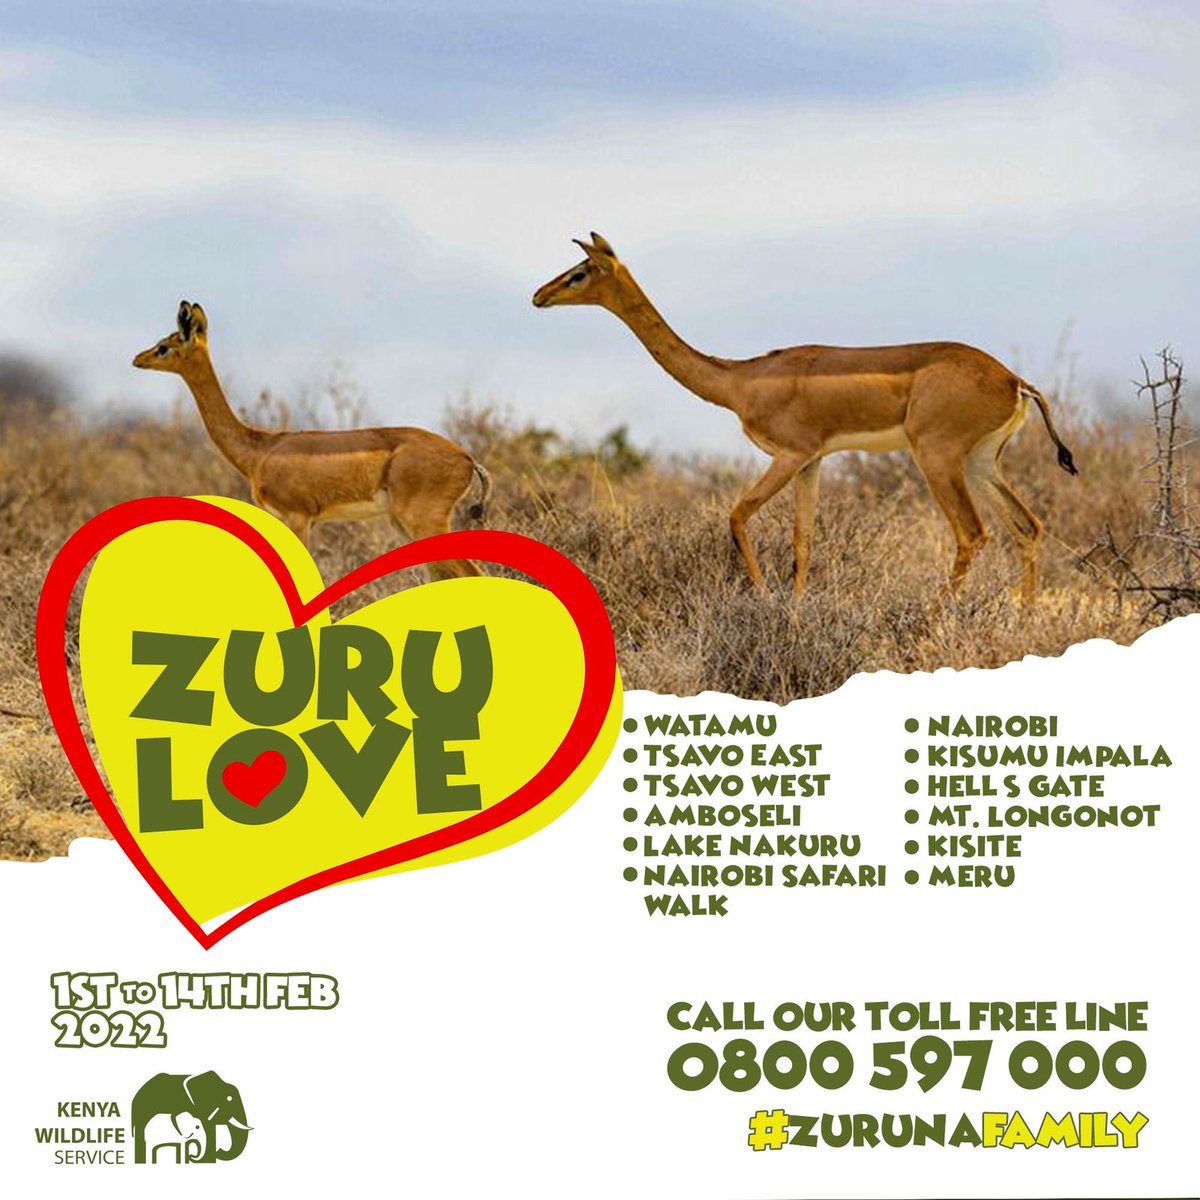 #ValentinesInThePark gives you a serene and intimate time with your loved one and nature
#zurulove